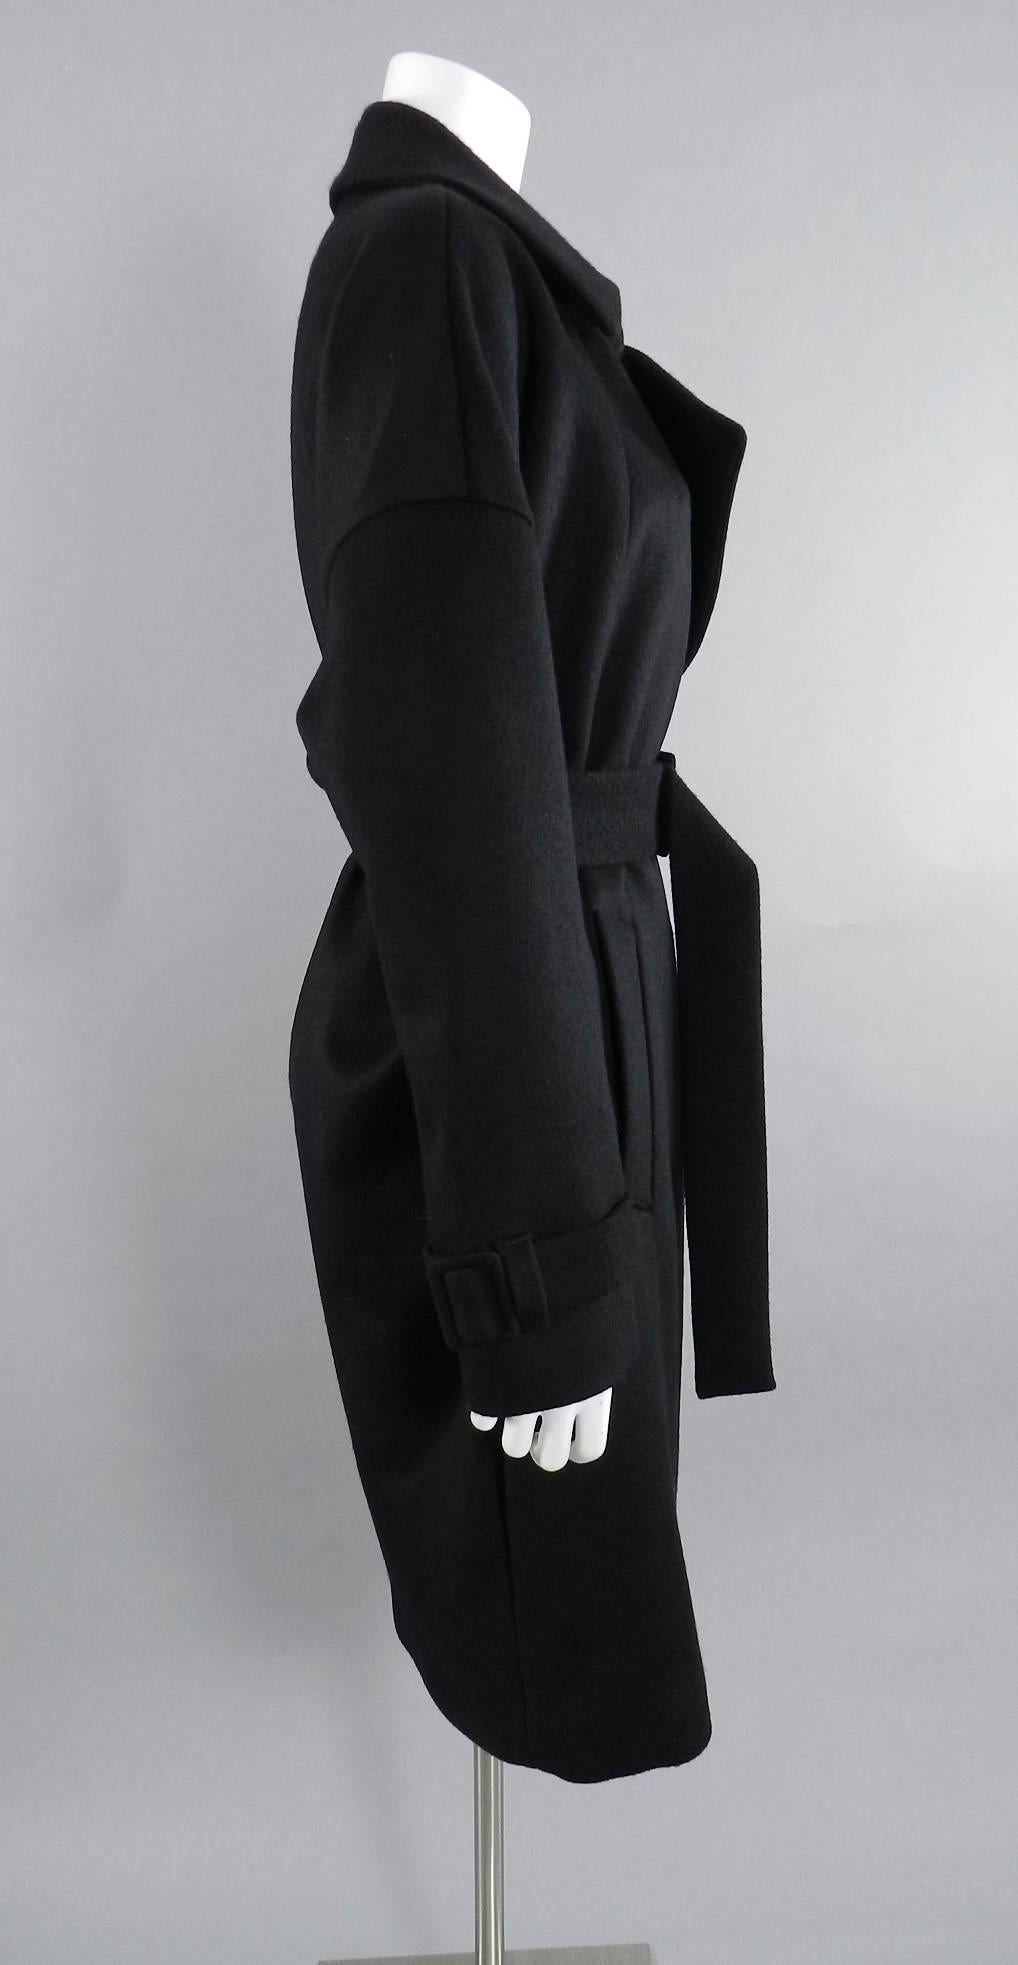 Mugler black wool belted coat. 2 front pockets, belted cuffs, and waist. Fall 2014. Tagged size FR 36 (USA 6) but this coat is cut oversized so can easily fit an 8 too.  Garment measures 46